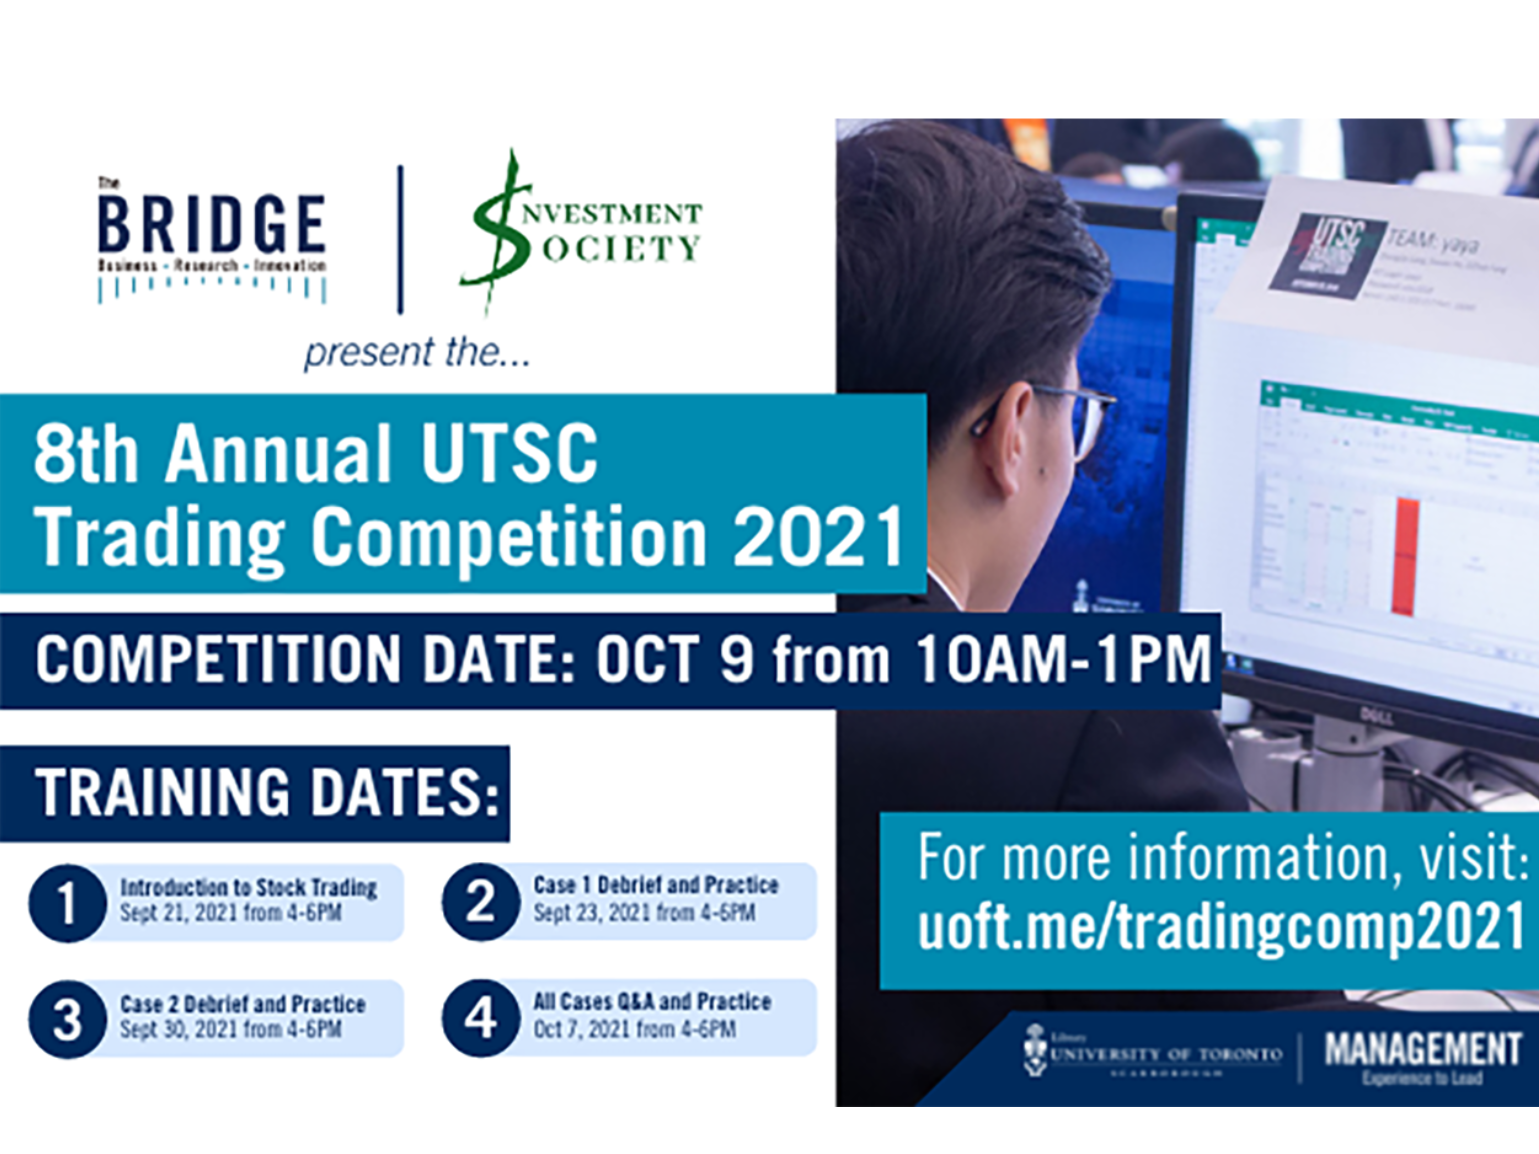 8th Annual UTSC Trading Competition 2021